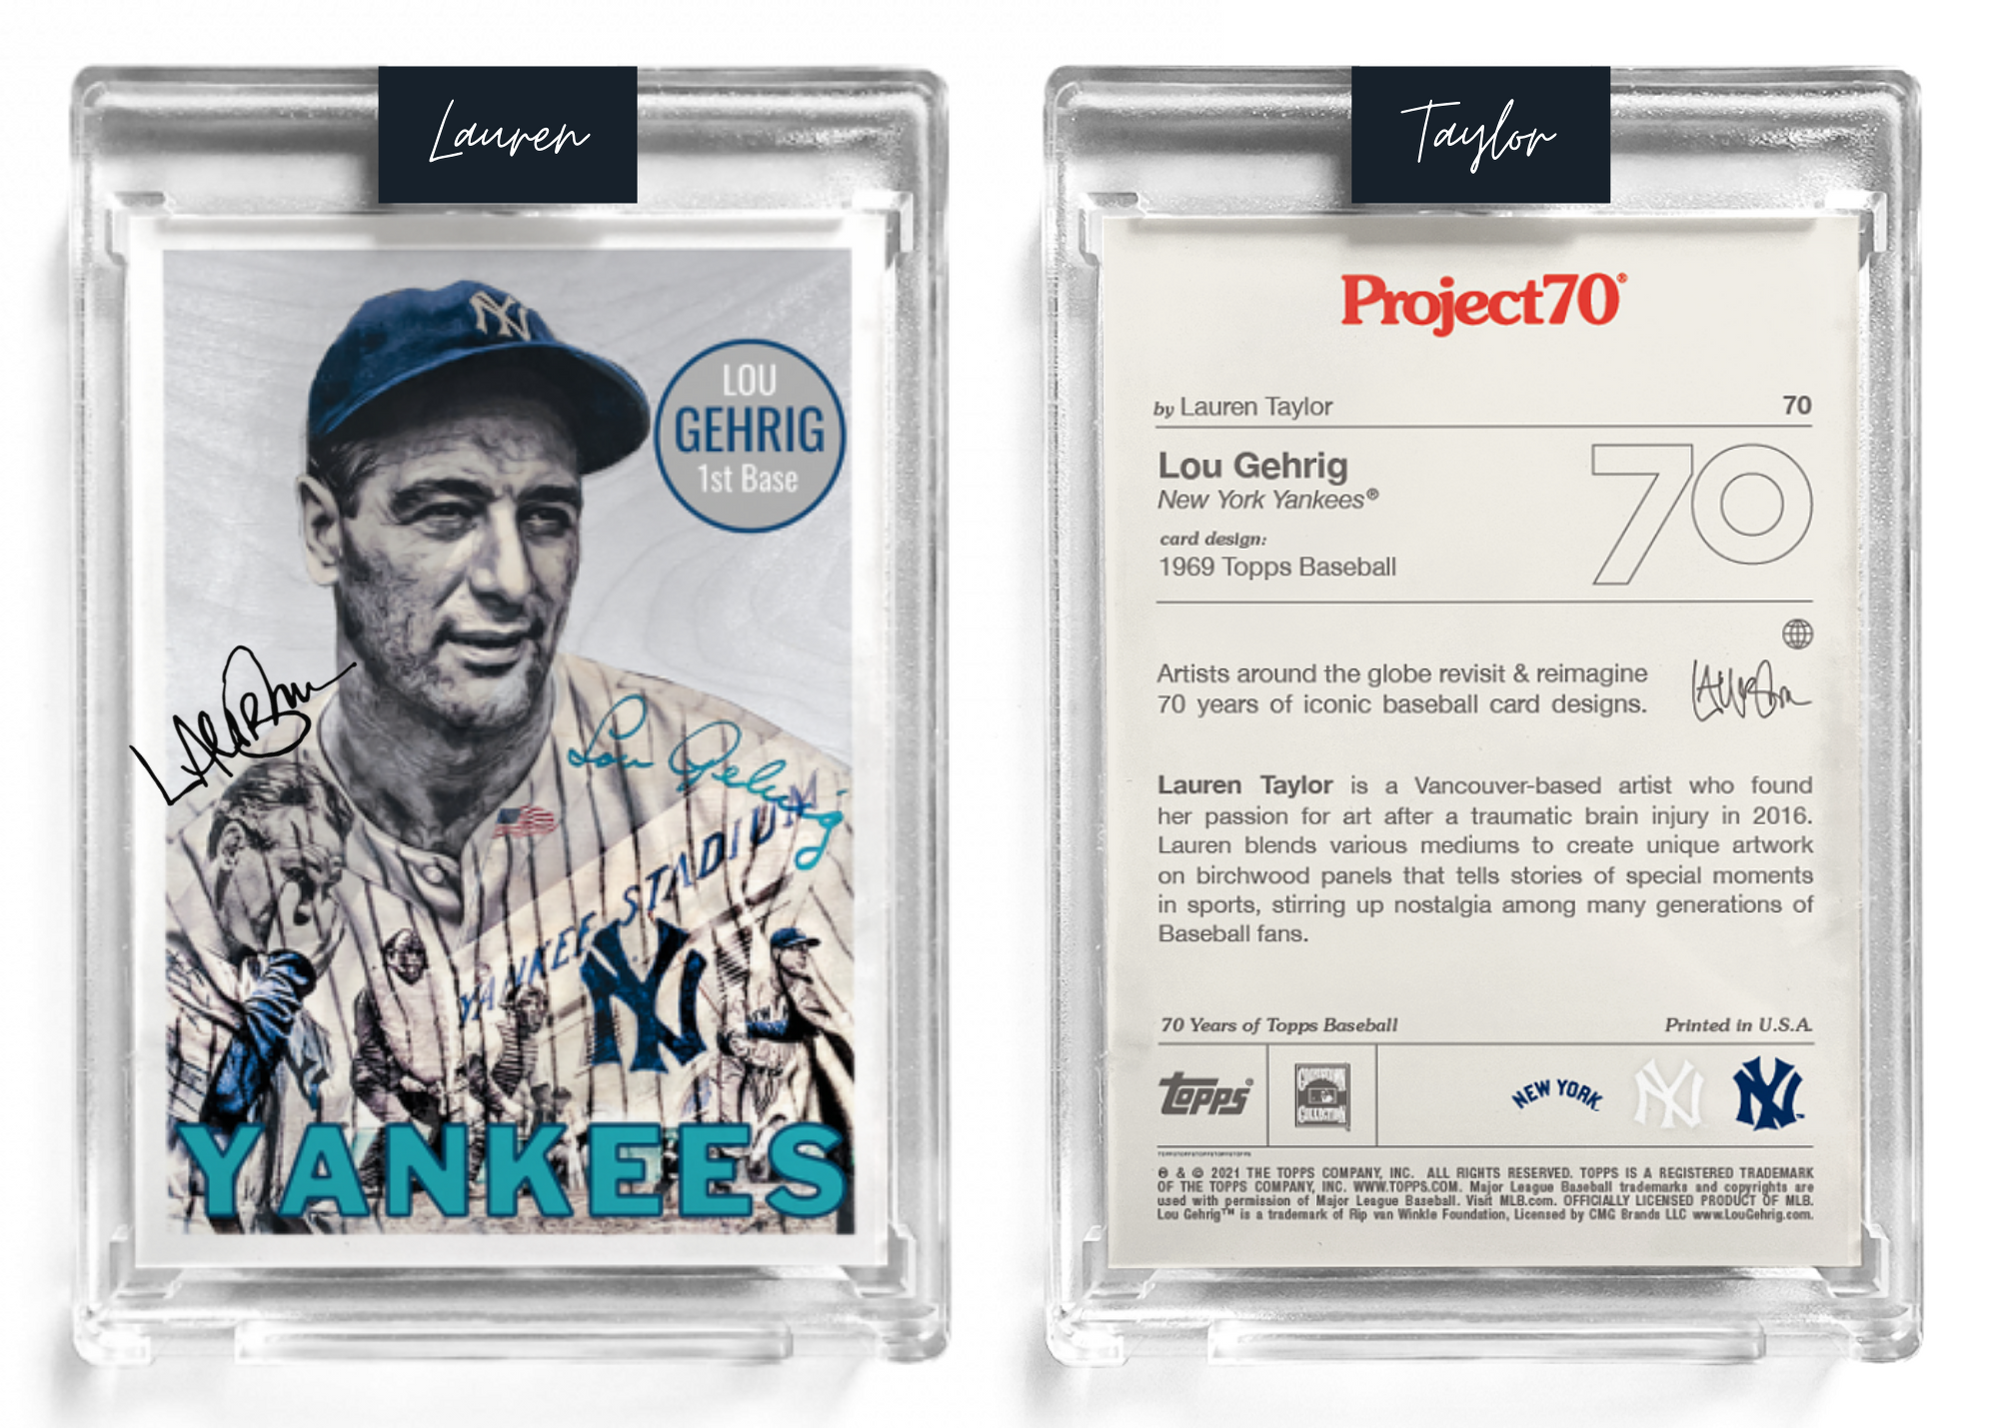 200 Orange Artist Signature - Topps Project 70 130pt card #422 by Lau